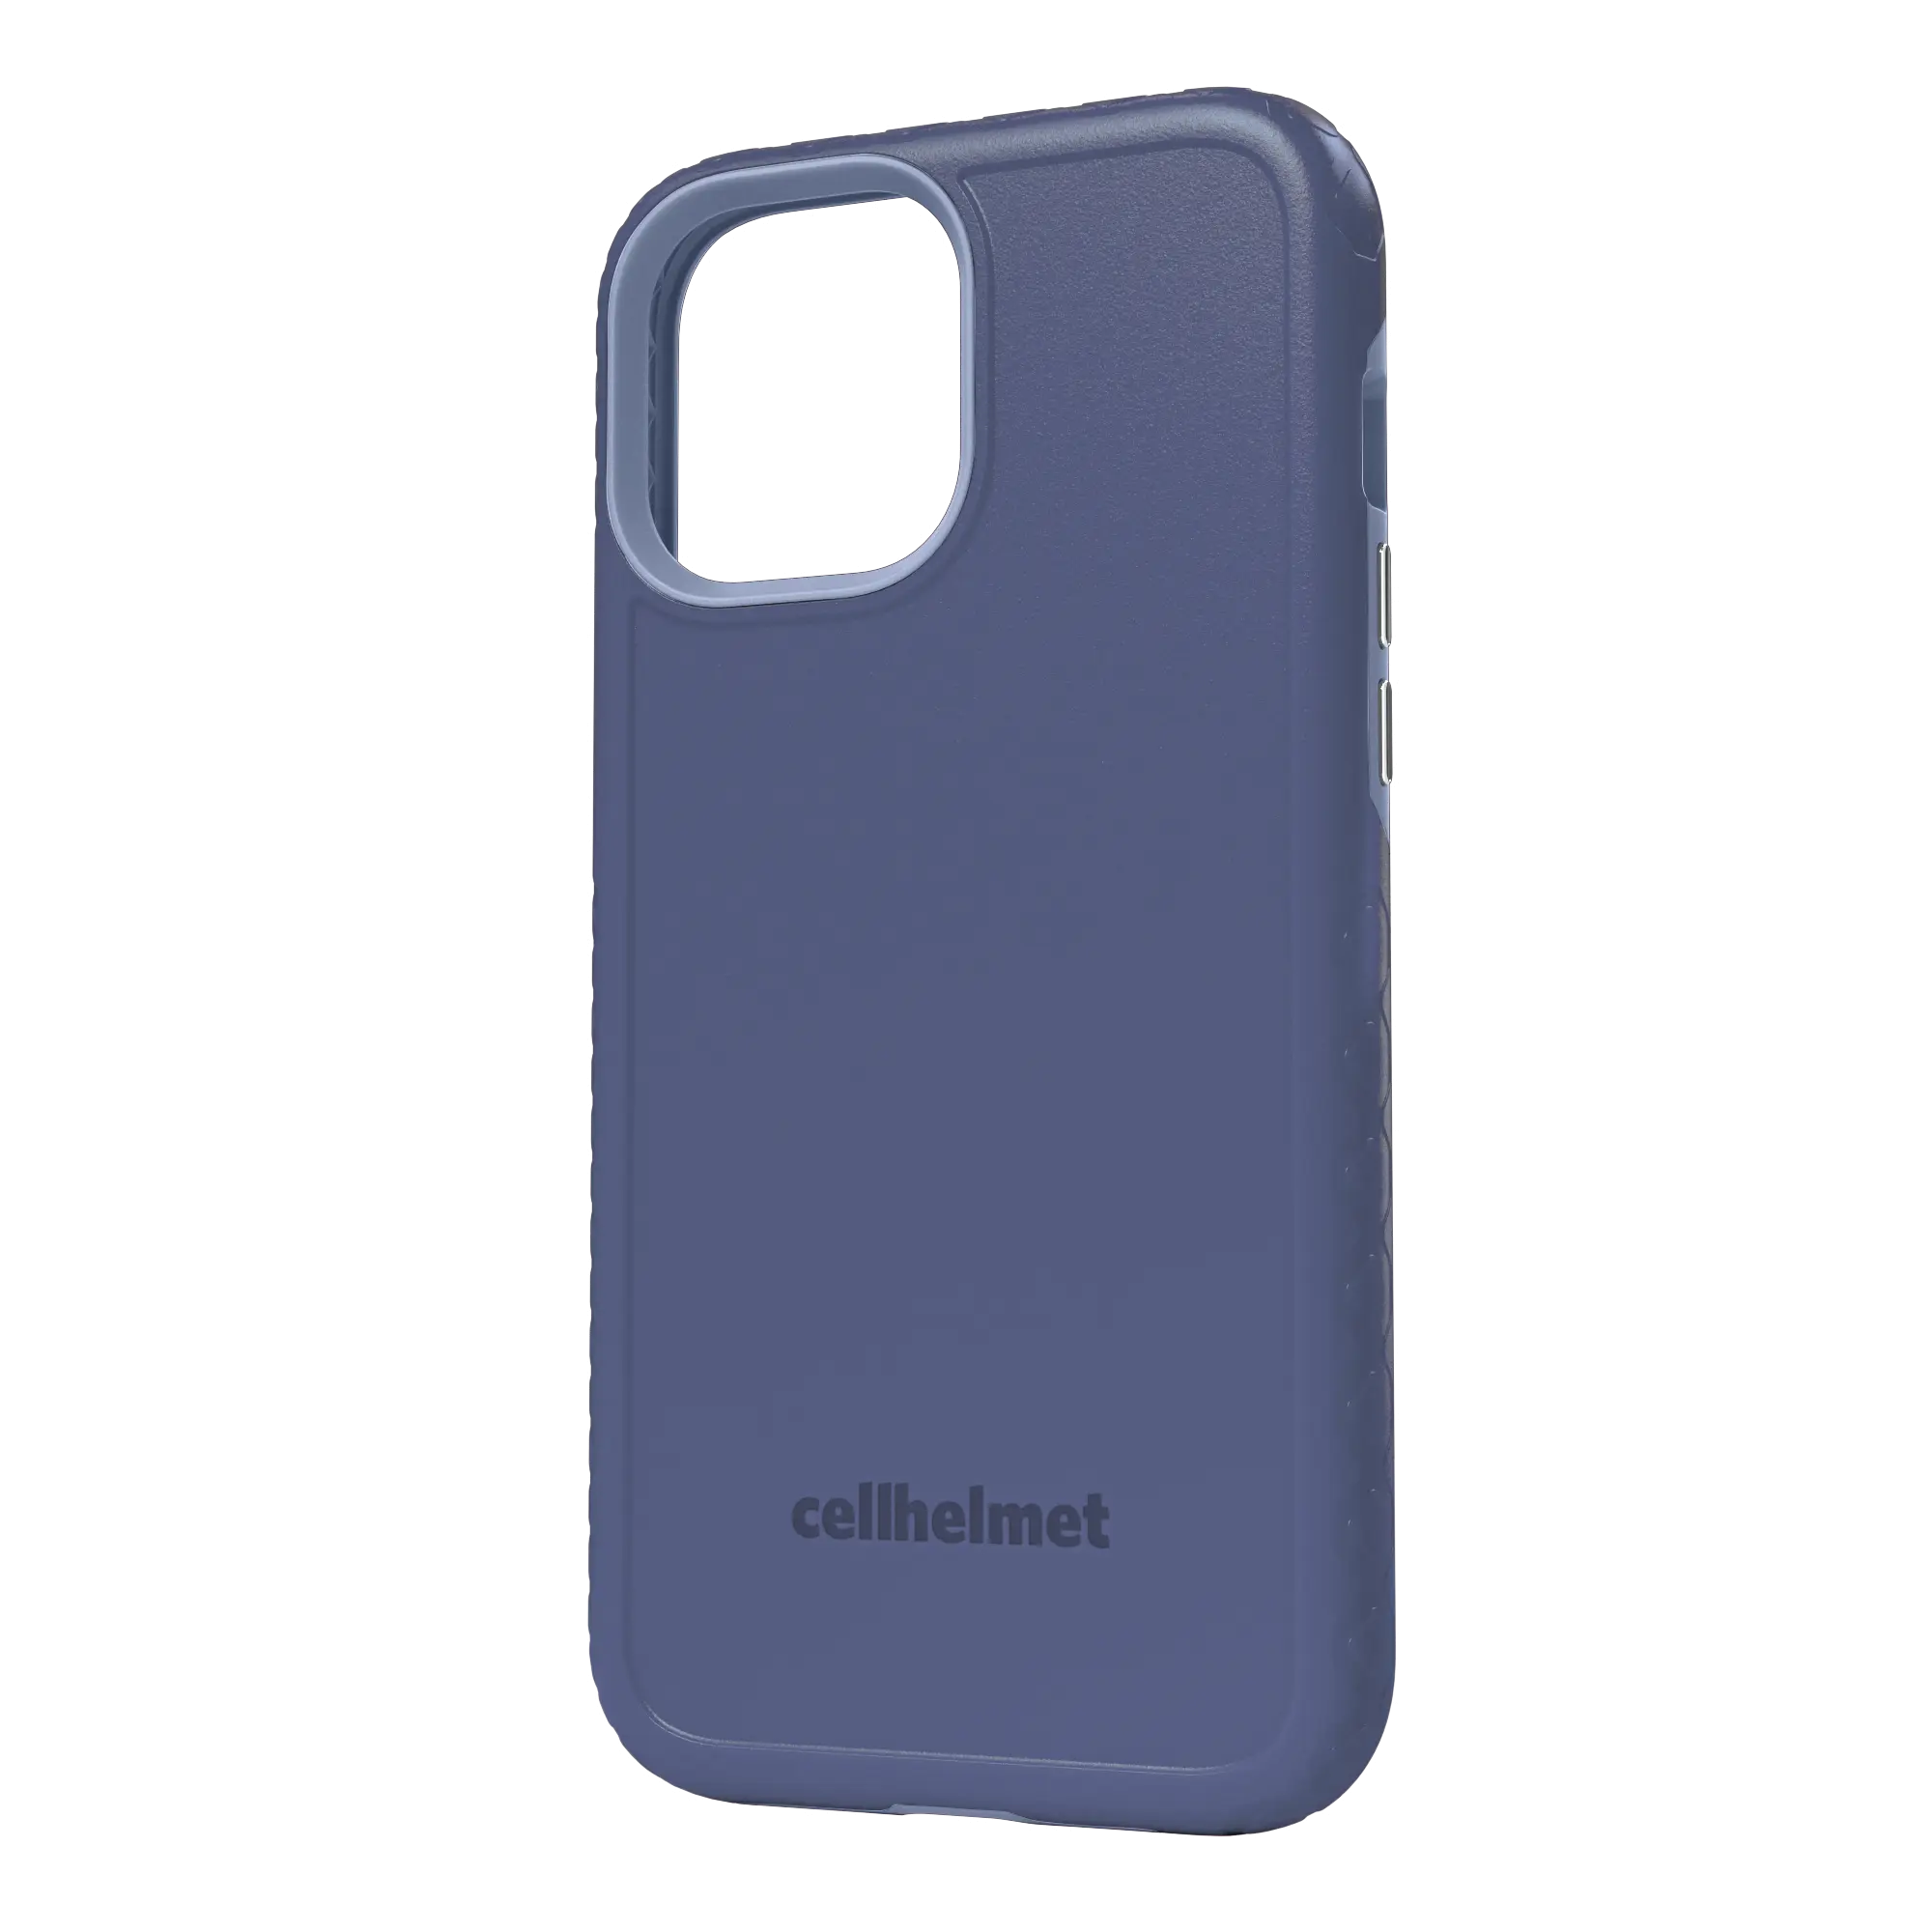 Blue cellhelmet Personalized Case for iPhone 12 Pro Max